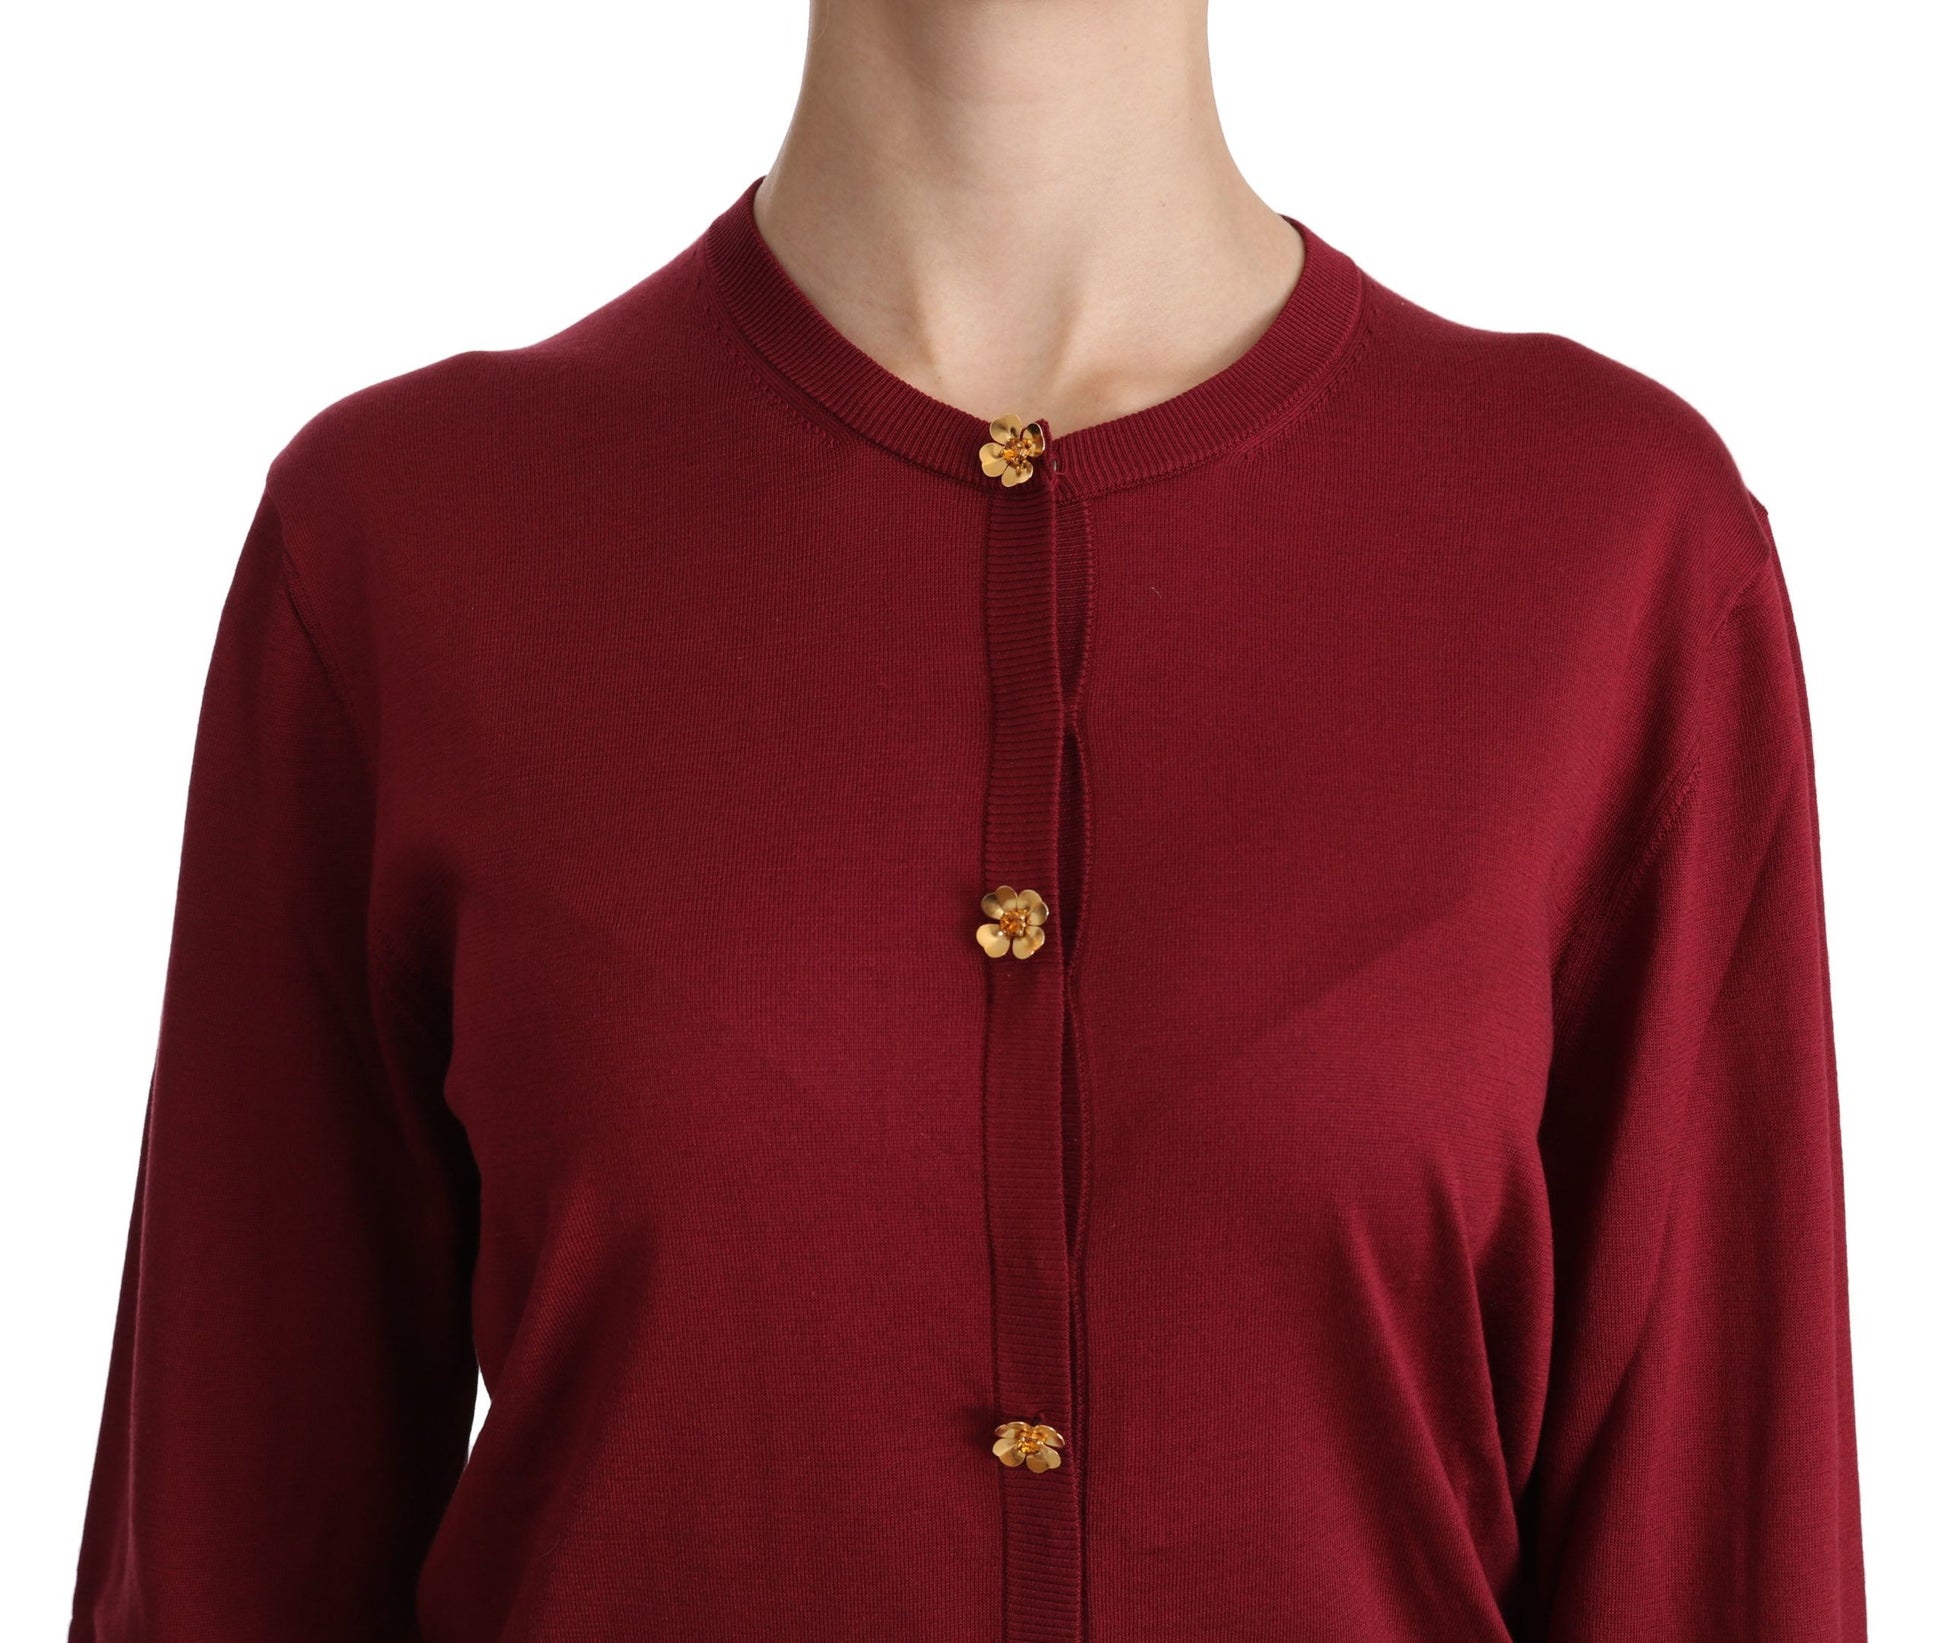 Silk Red Cardigan Top with Button Accents